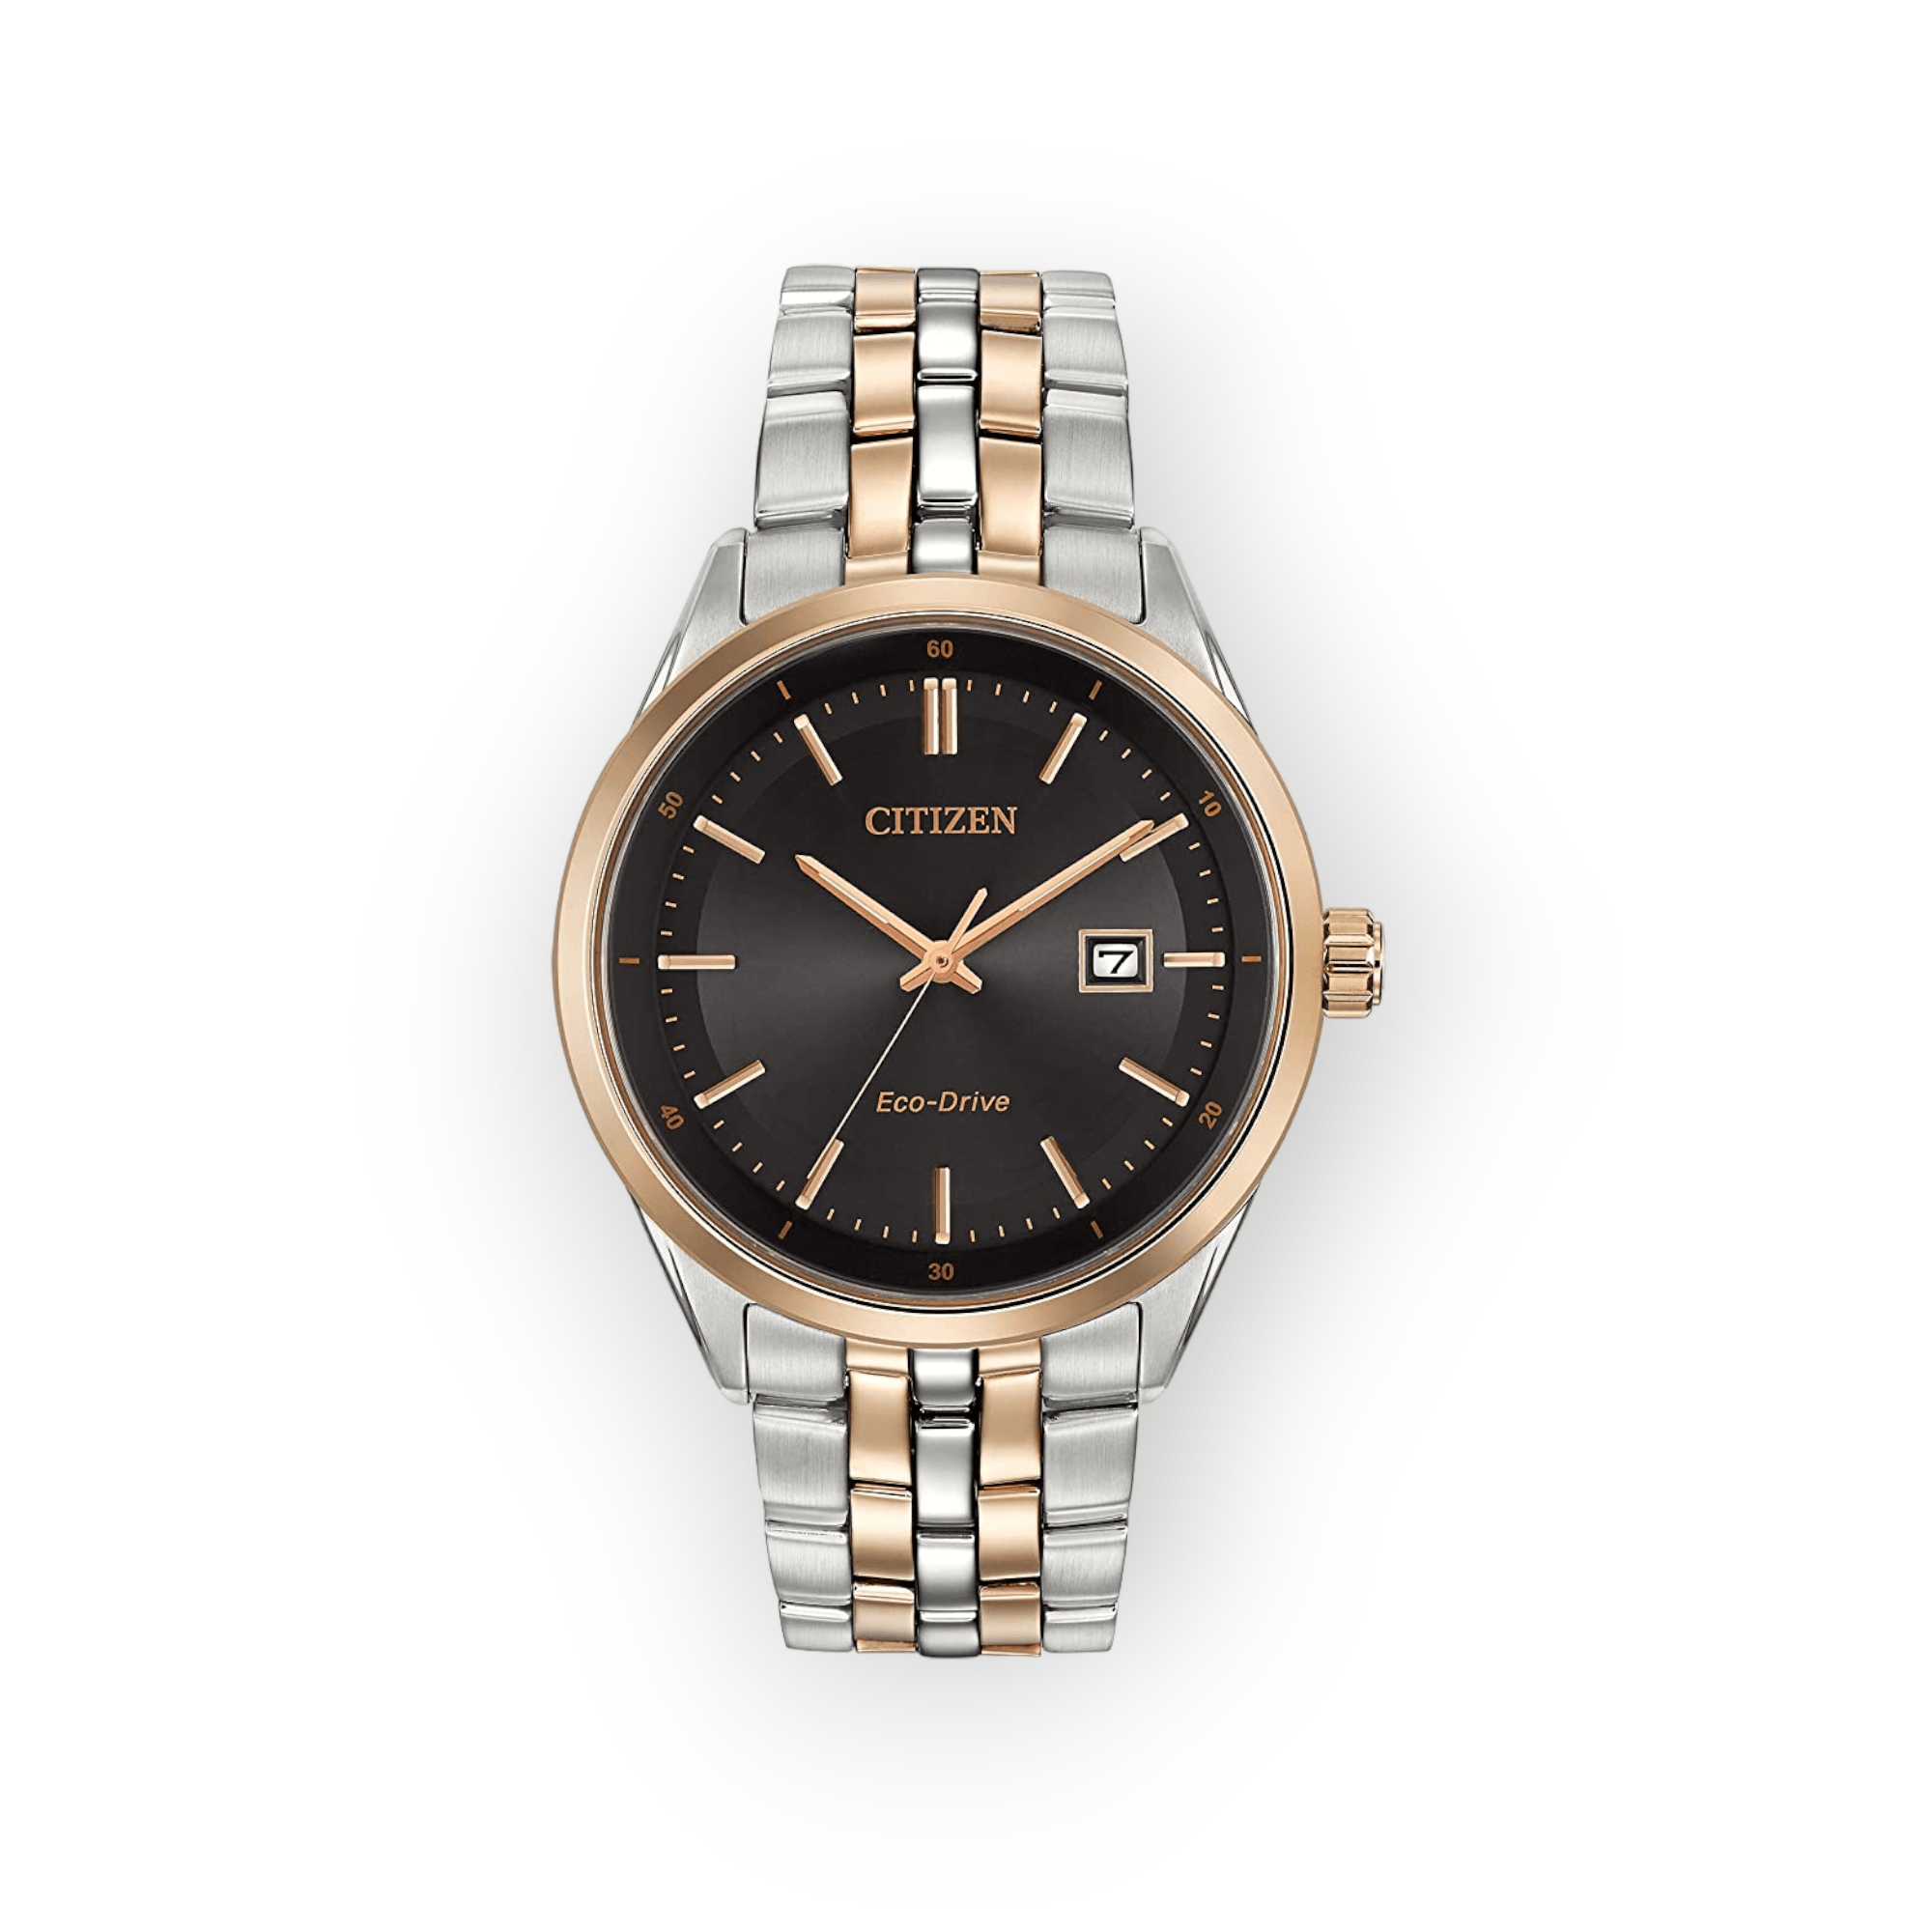 Citizen Men’s Eco-Drive Stainless